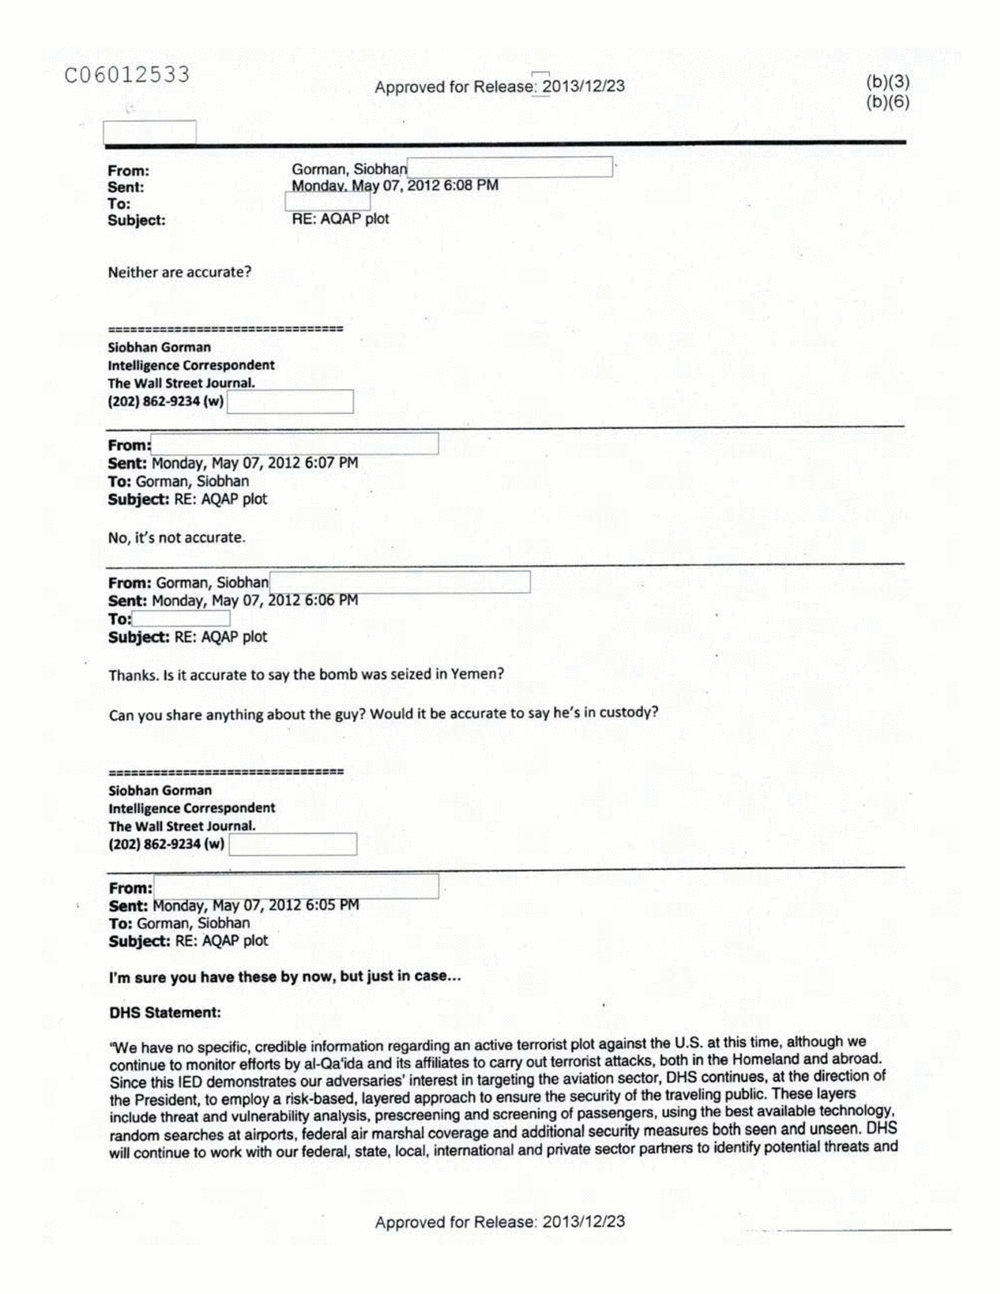 Page 63 from Email Correspondence Between Reporters and CIA Flacks